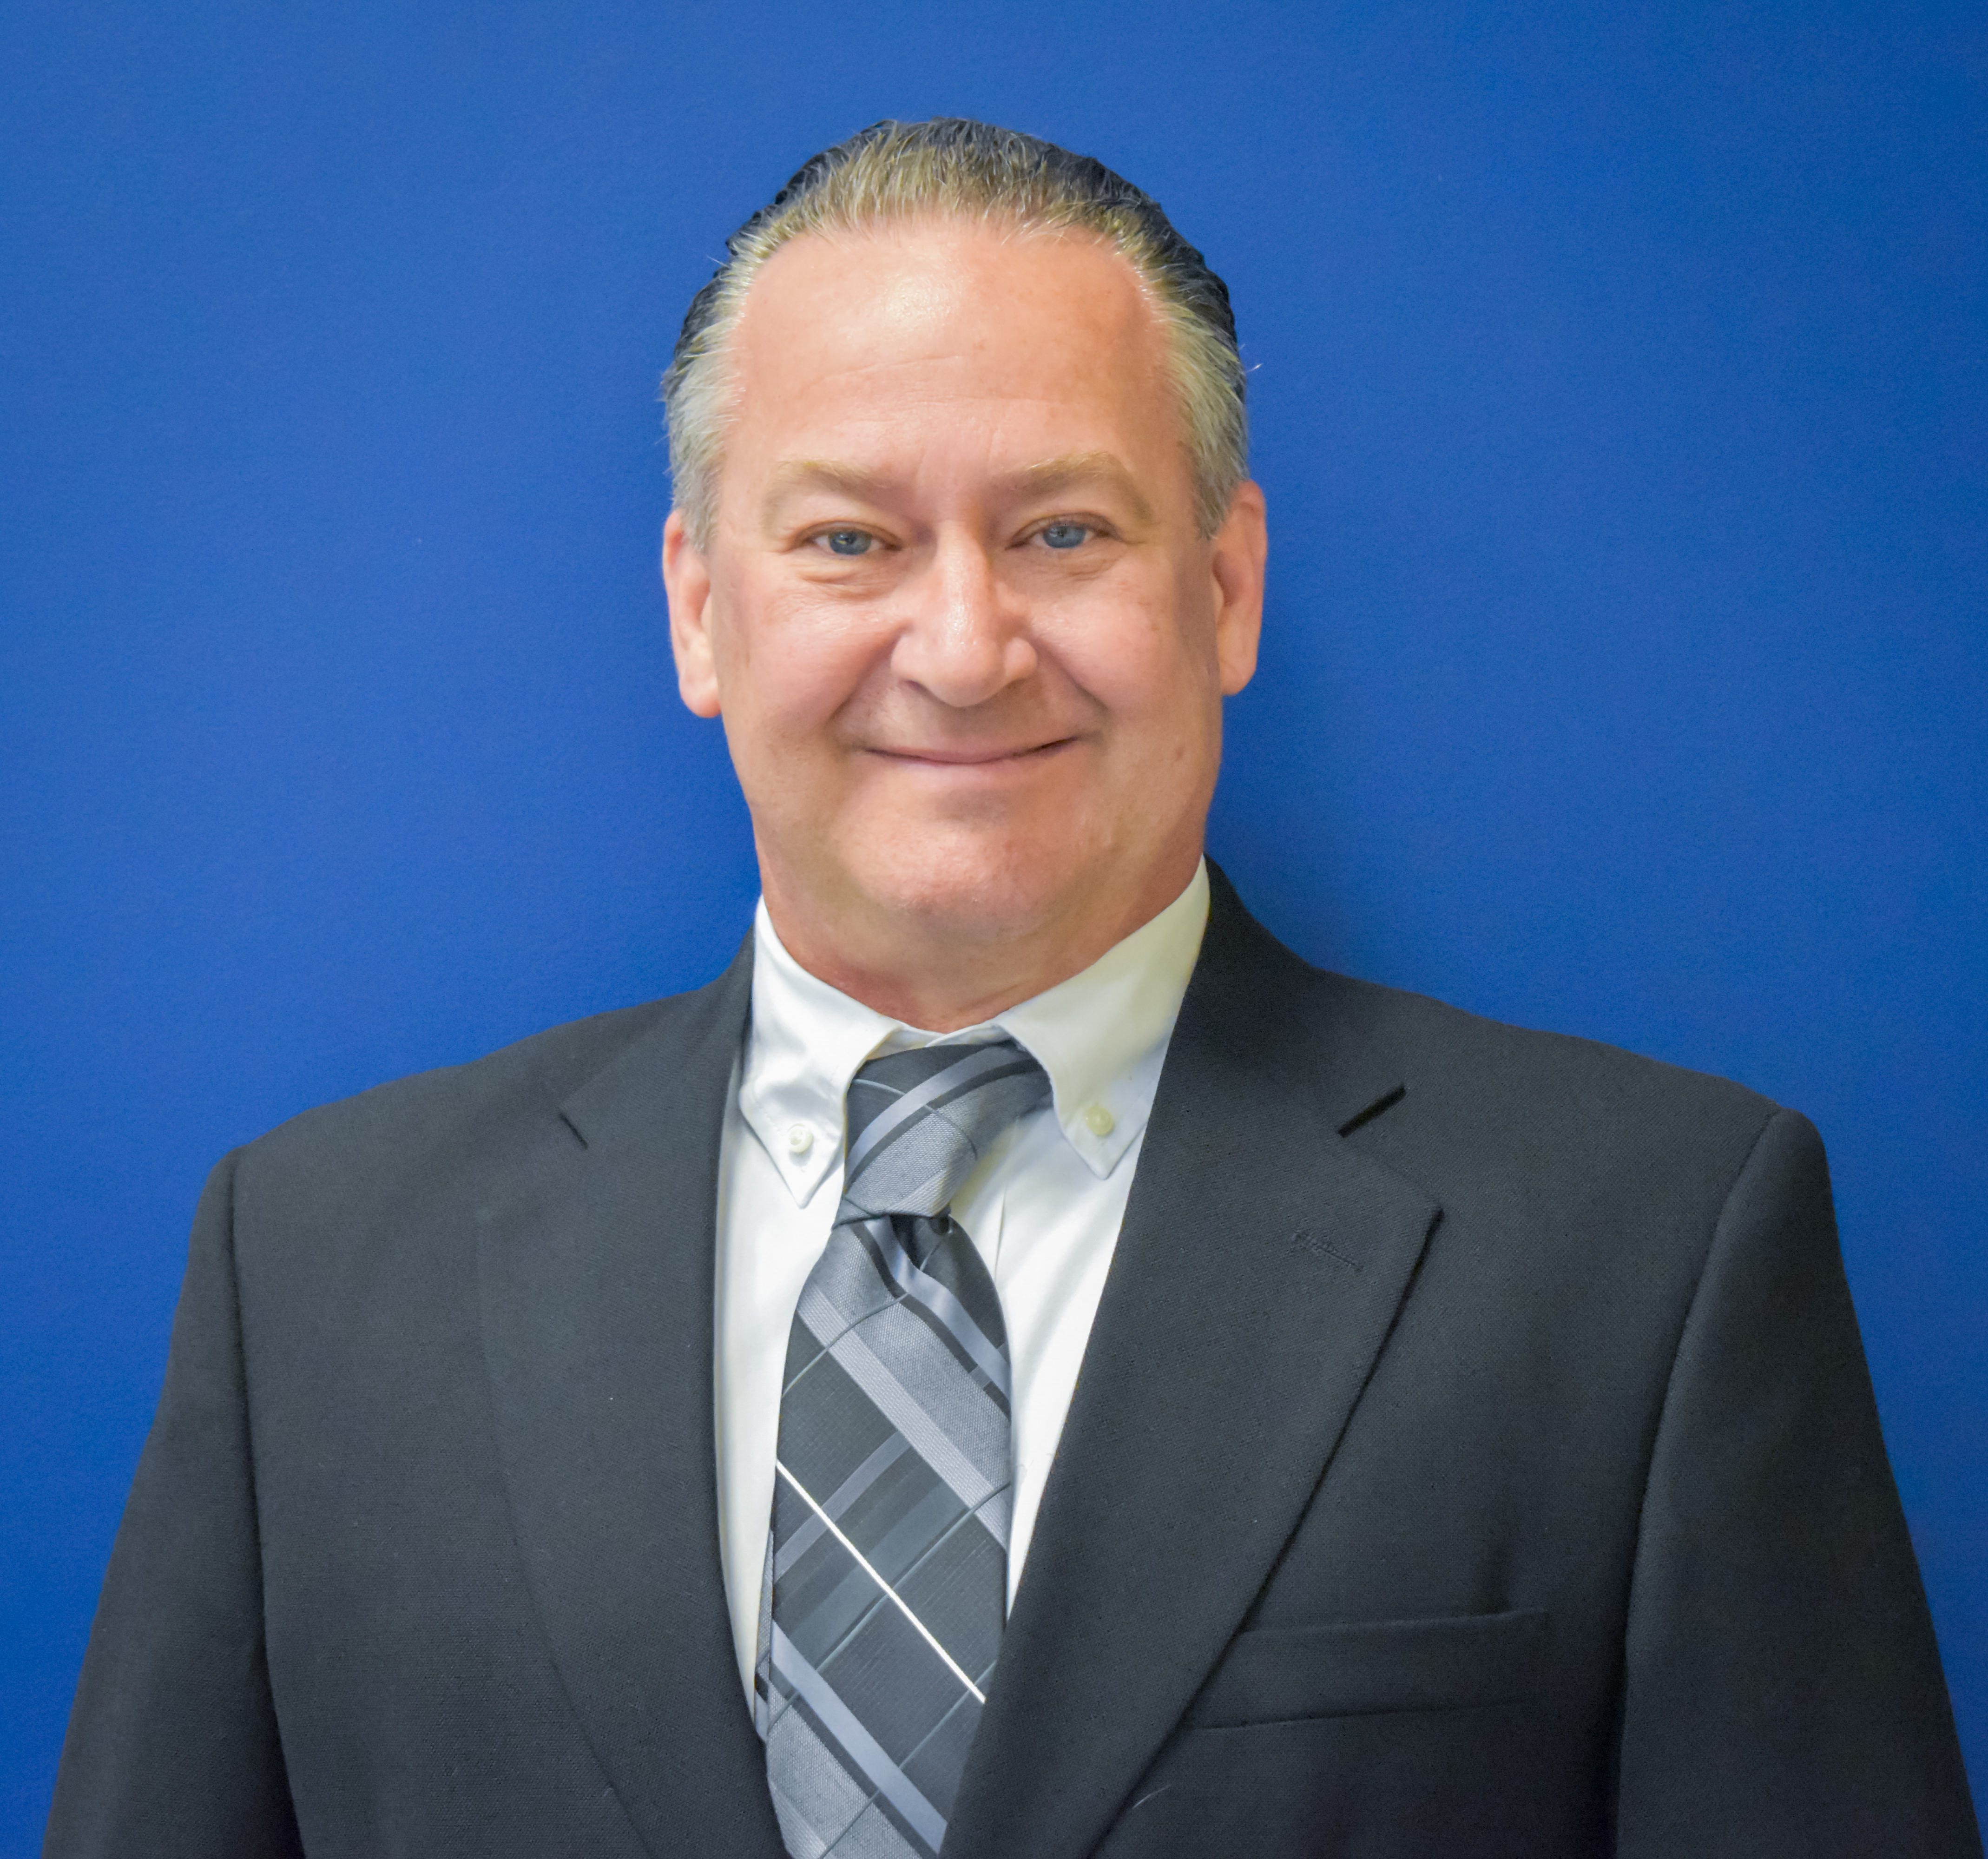 Michael Morrison wearing a suit and tie looks at camera with blue wall behind him